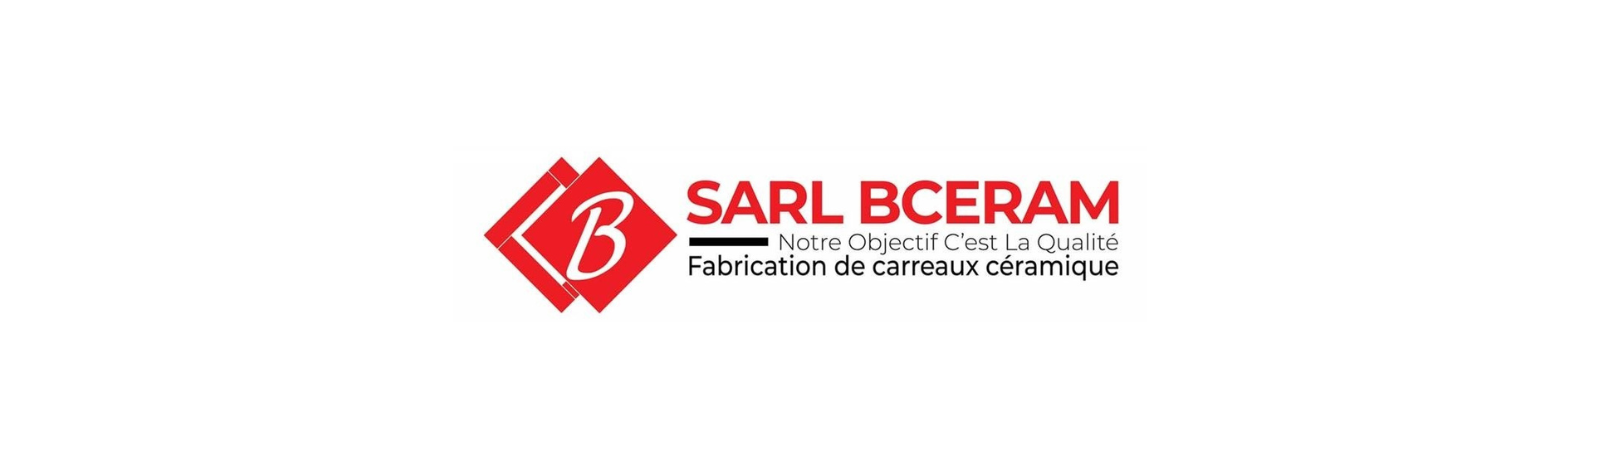 Bceram grows with SACMI and focuses on exports